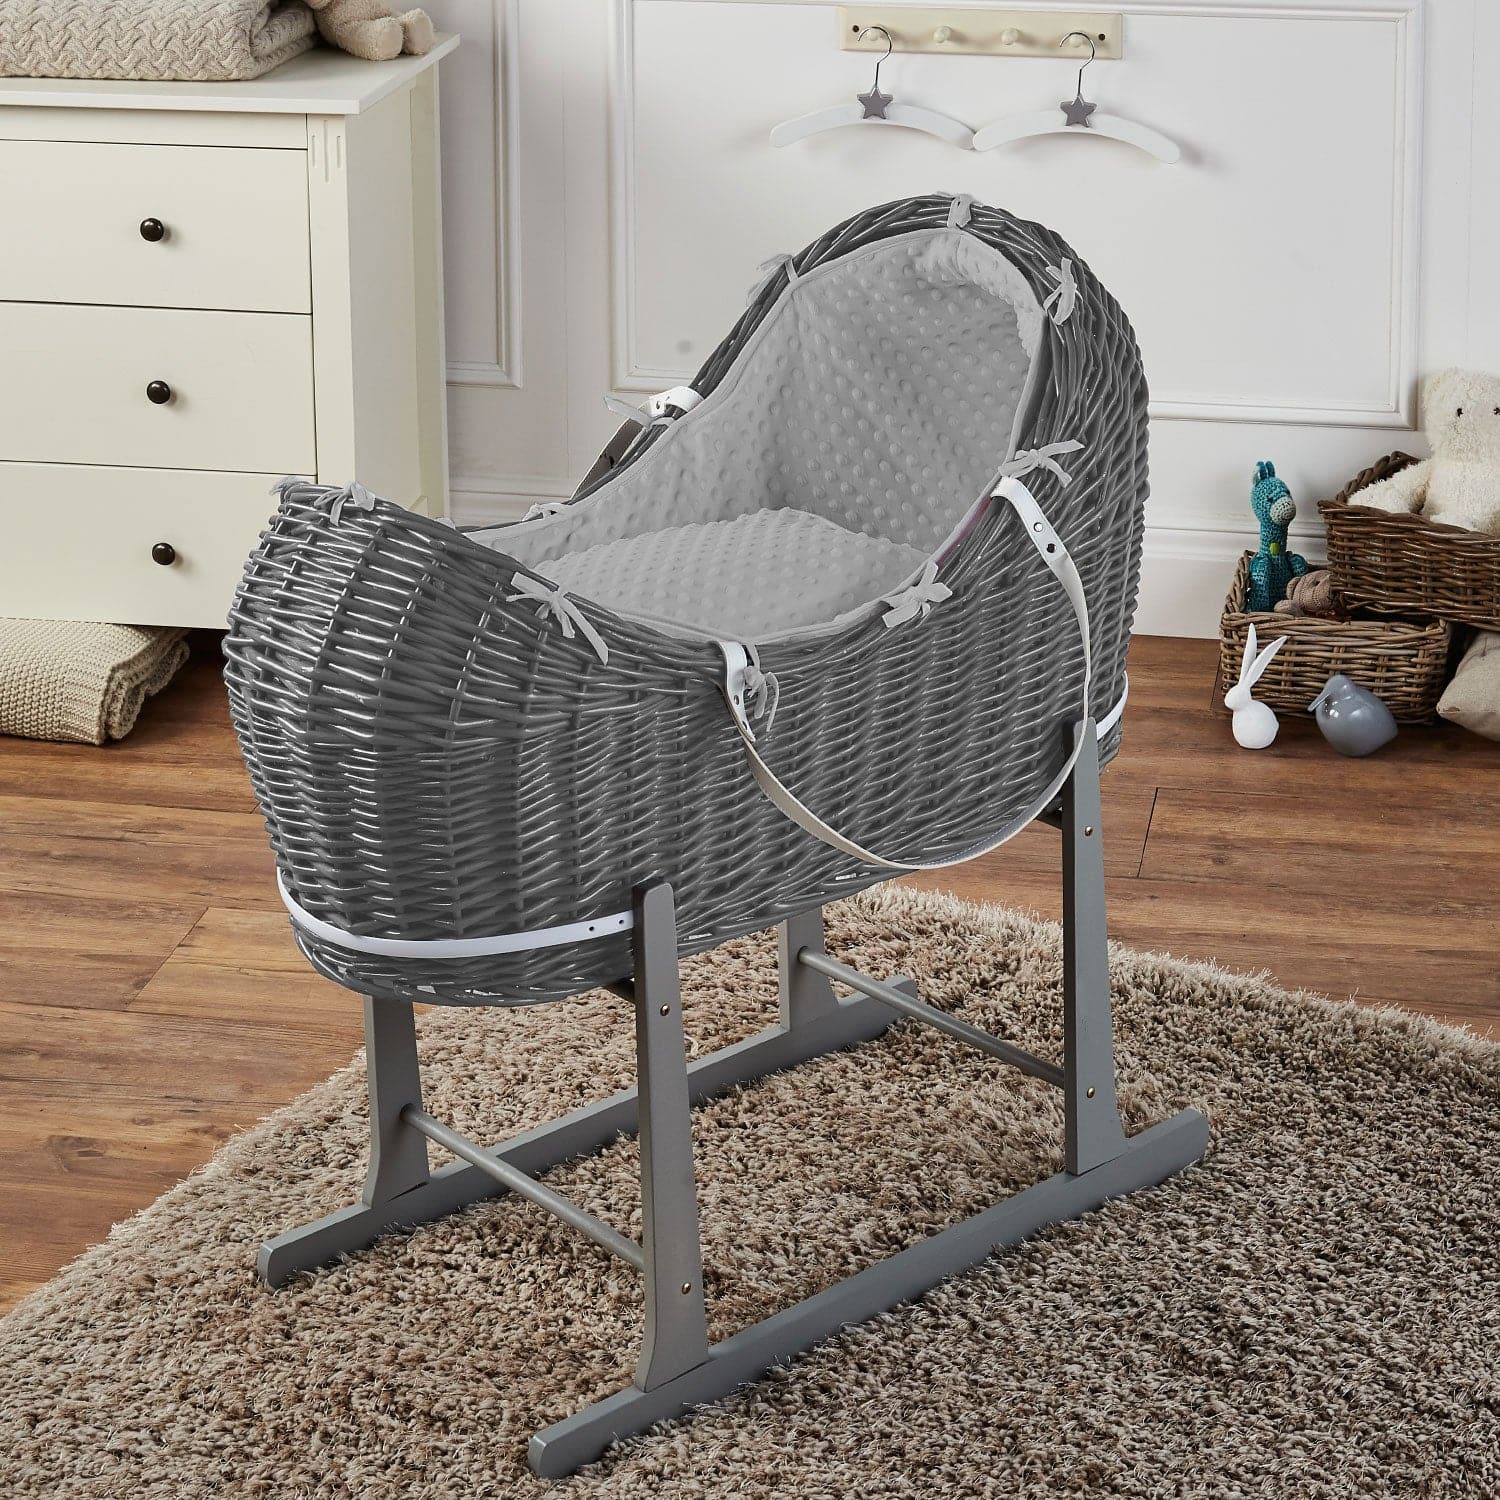 Wicker Deluxe Pod Baby Moses Basket With Stand - Grey / Dimple / Grey | For Your Little One